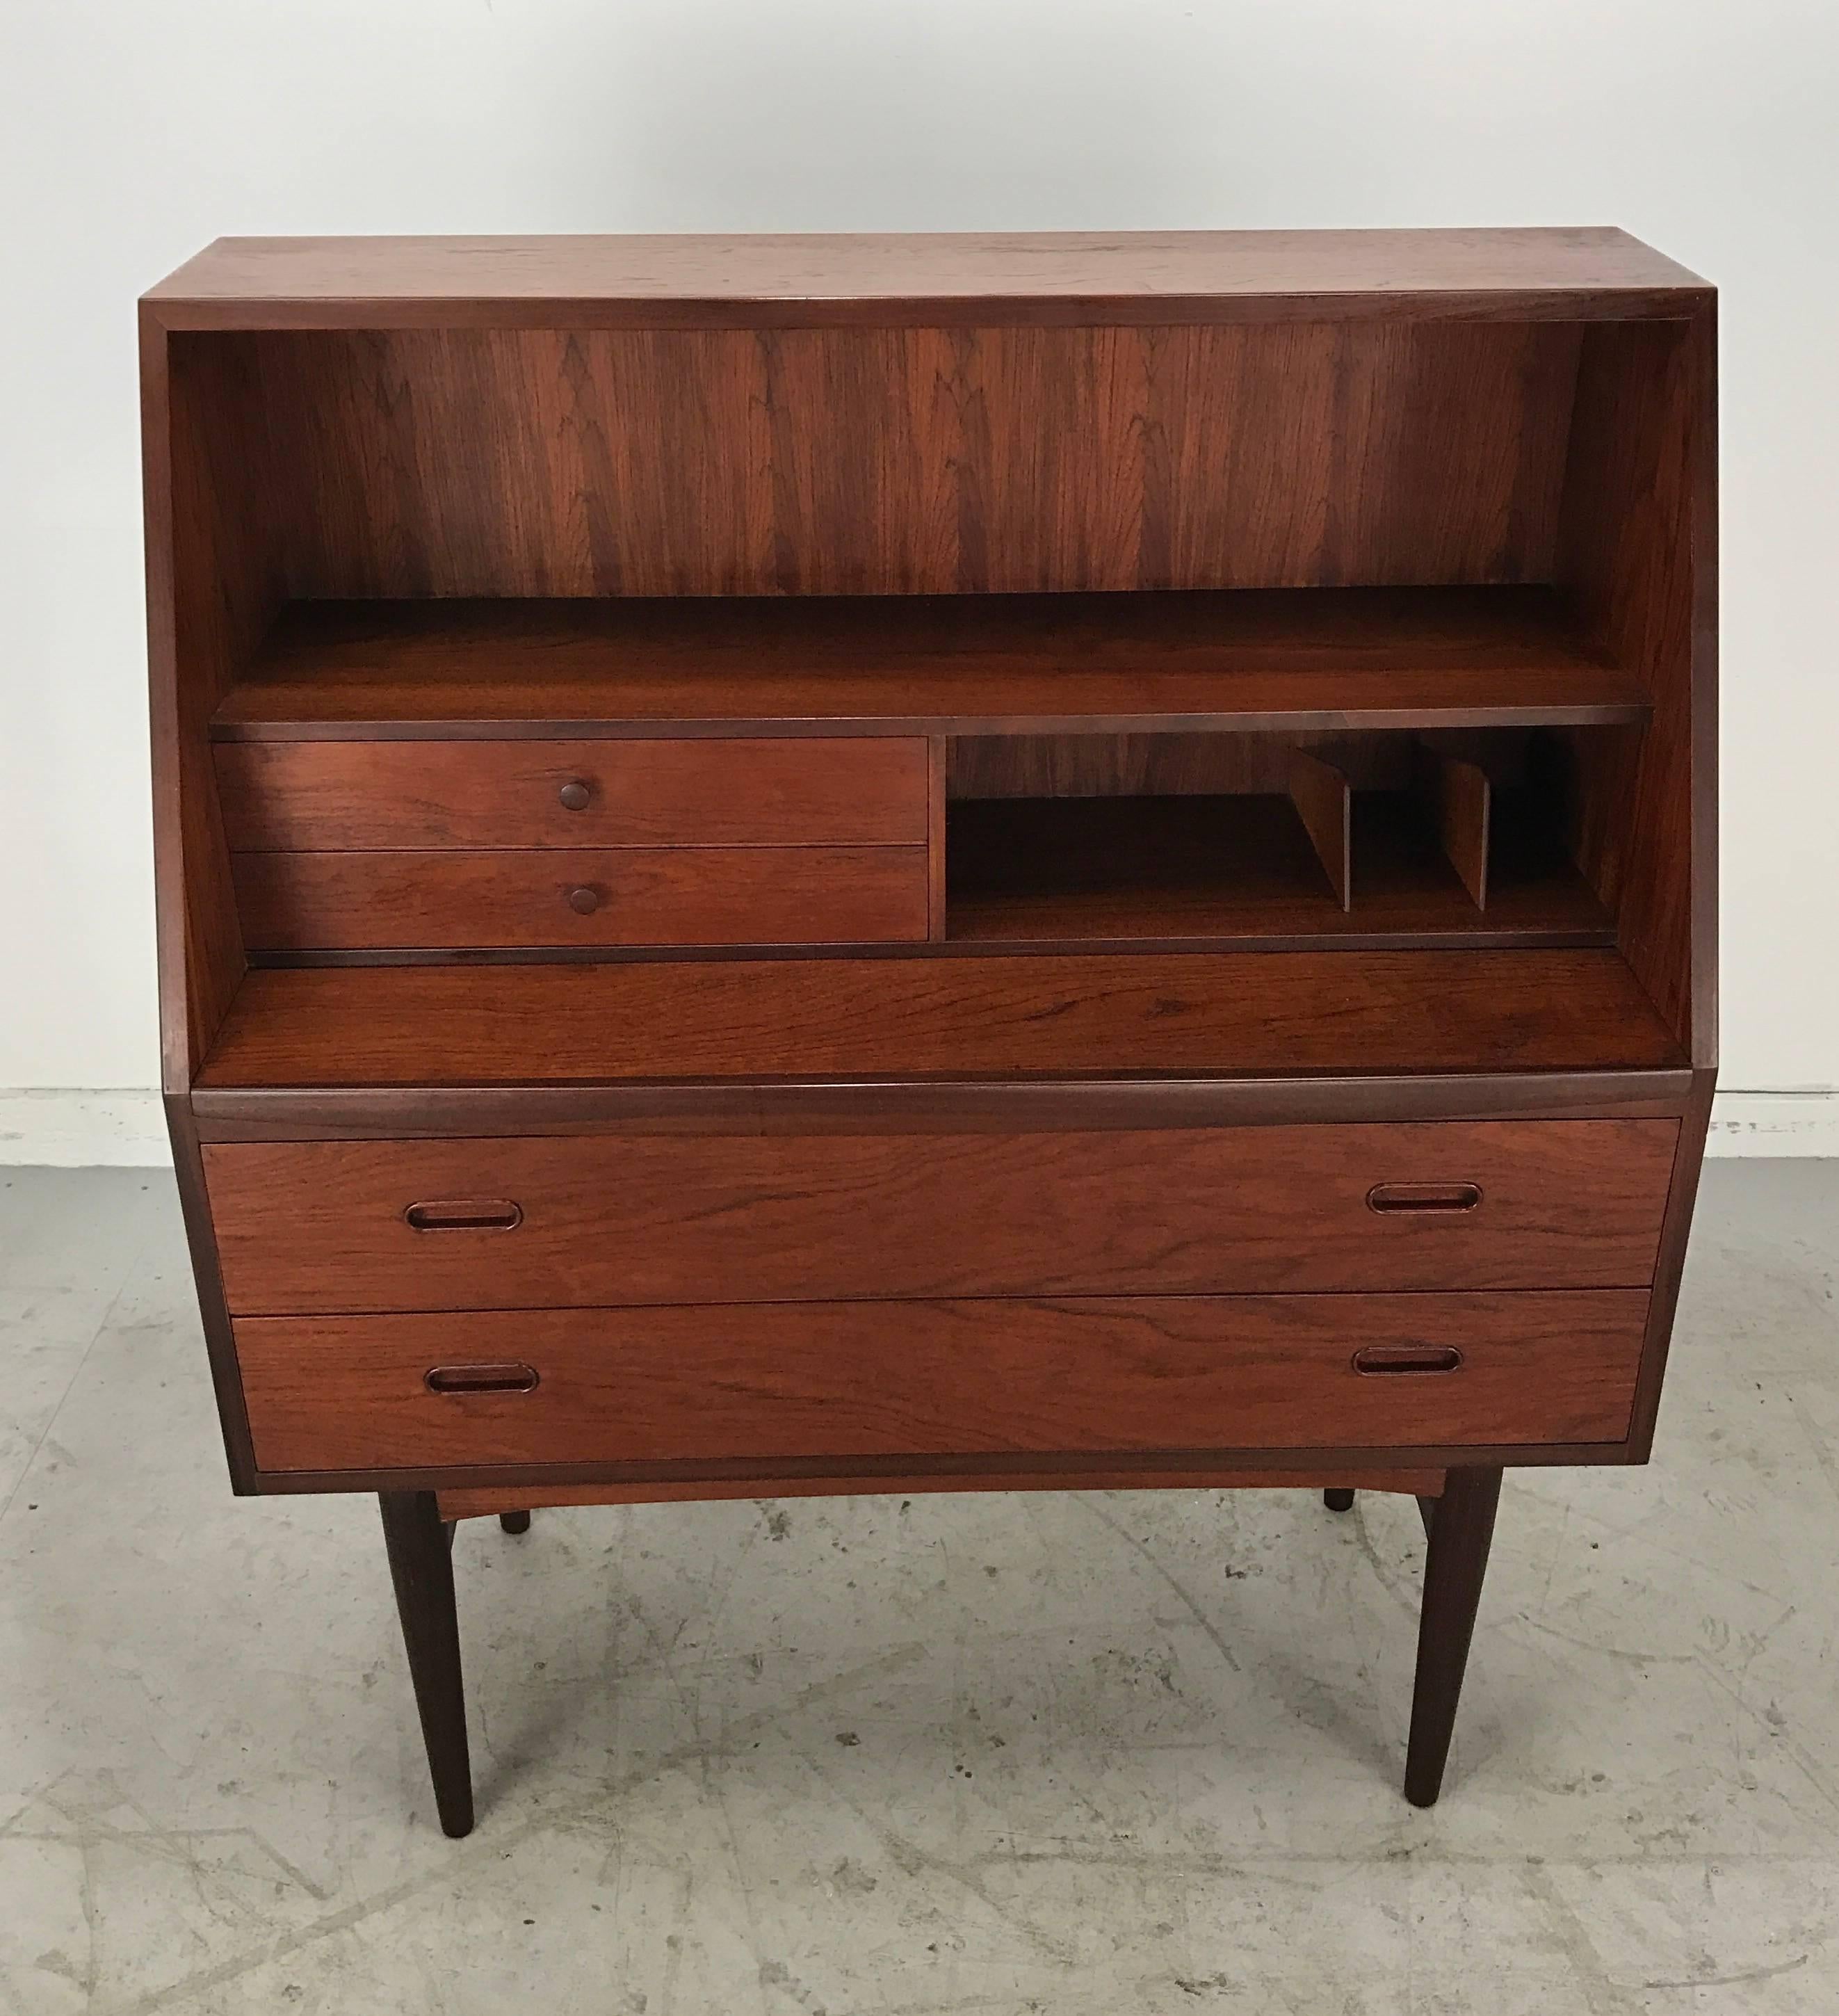 Rosewood chest or dresser pull-out desk, beautiful bookmatched woods, superior quality, birch interior dovetail joinery and finished back. Designed by Arne Vodder made in Denmark, secretary Measures 45.5